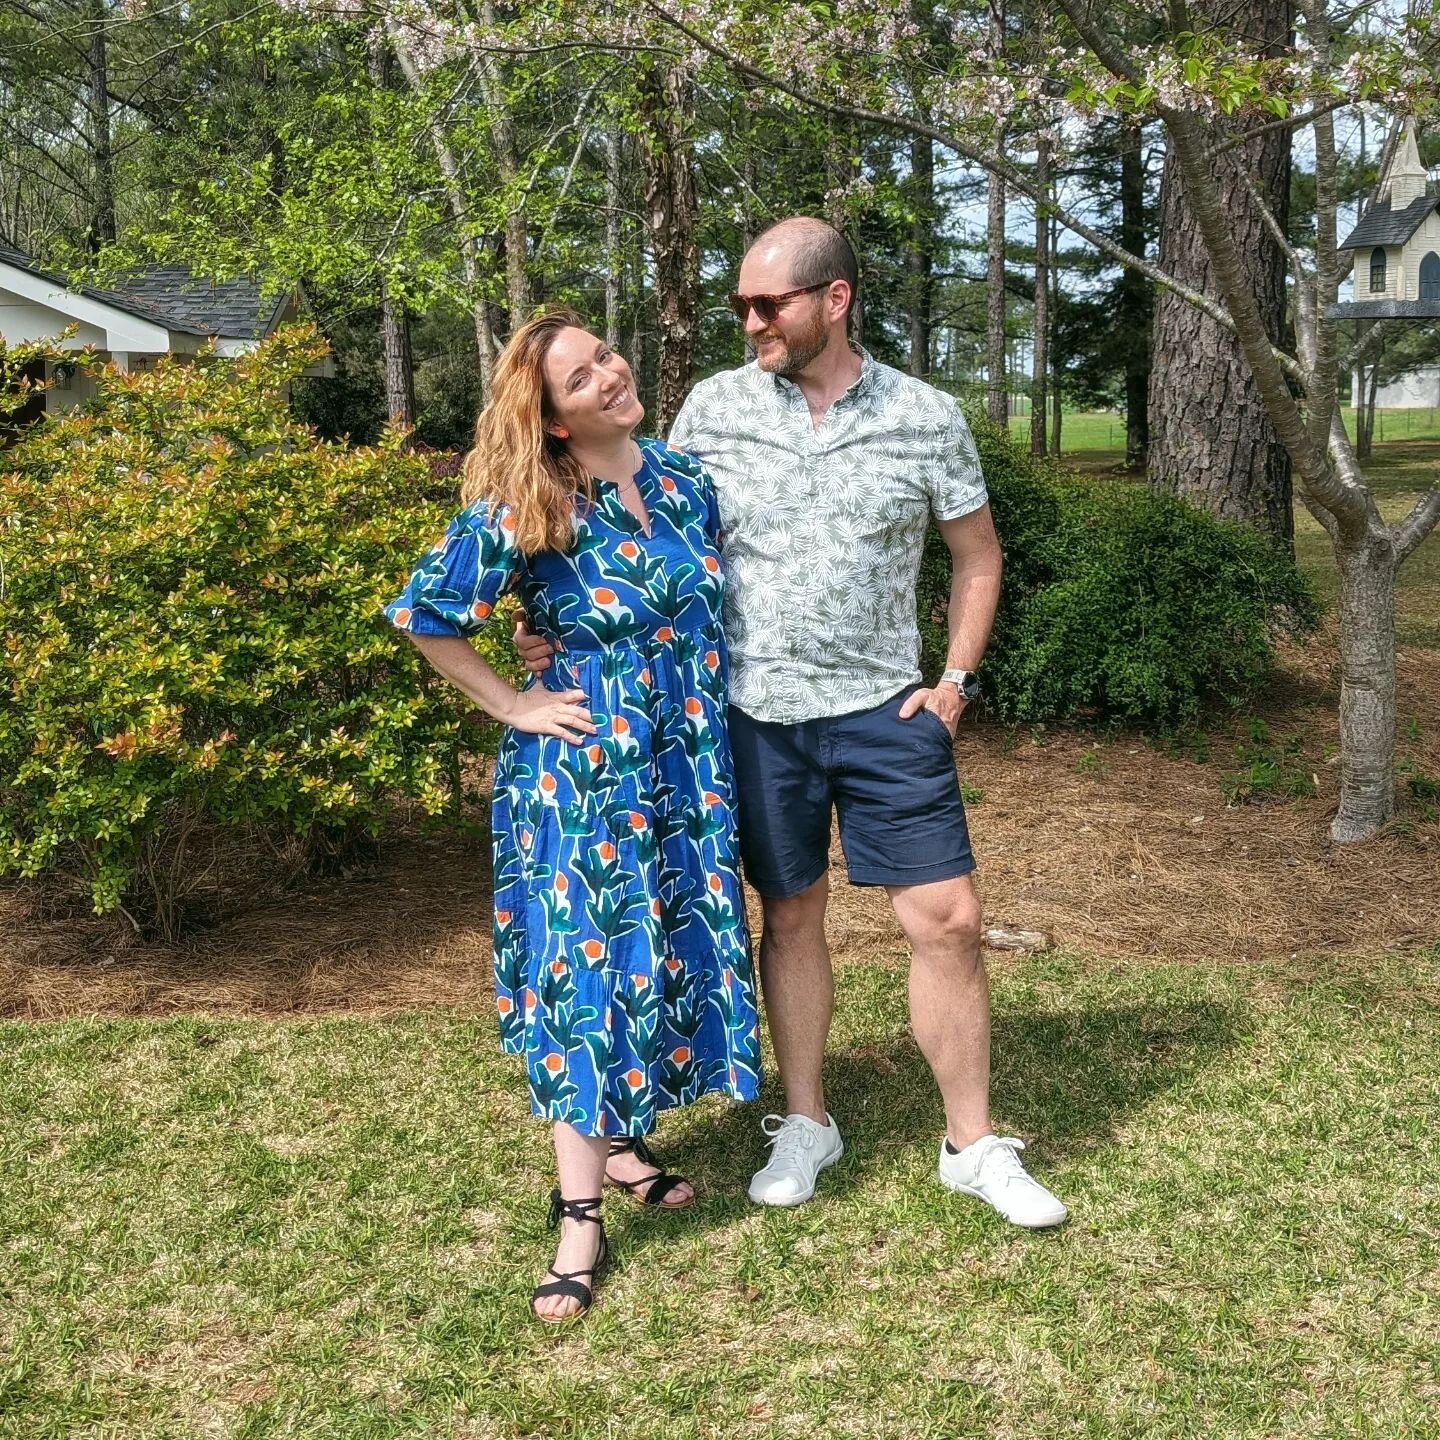 Q1 highlights:
❤️ Two years married!
⛰️ One year since Trent first departed for the Appalachian Trail
🐣 Hosted our first family holiday event
🏠 Celebrated one year in our home
🐈&zwj;⬛ Julep turned two
👟 Achieved several running milestones
📚 Read